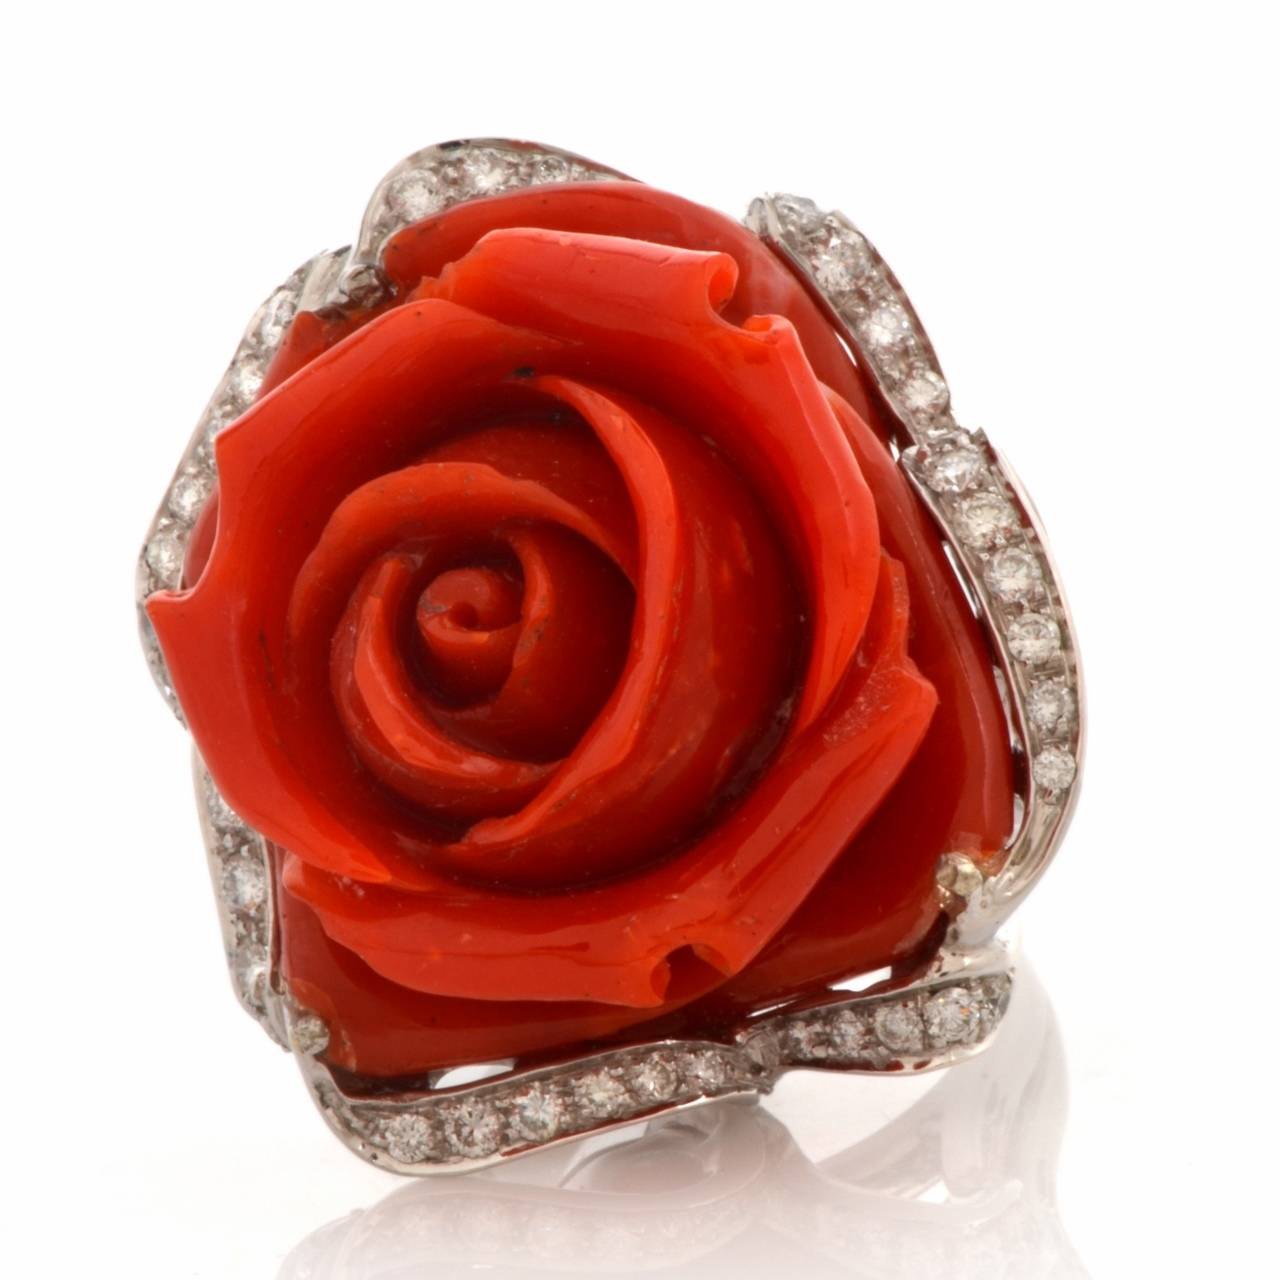 This Retro diamond and coral ring of opulent and captivating aesthetic is crafted in solid 18K gold, weighing 33.7 grams. Creatively designed as a red rose posed on diamond leaves, this fascinating ring exposes a masterfully carved  natural color